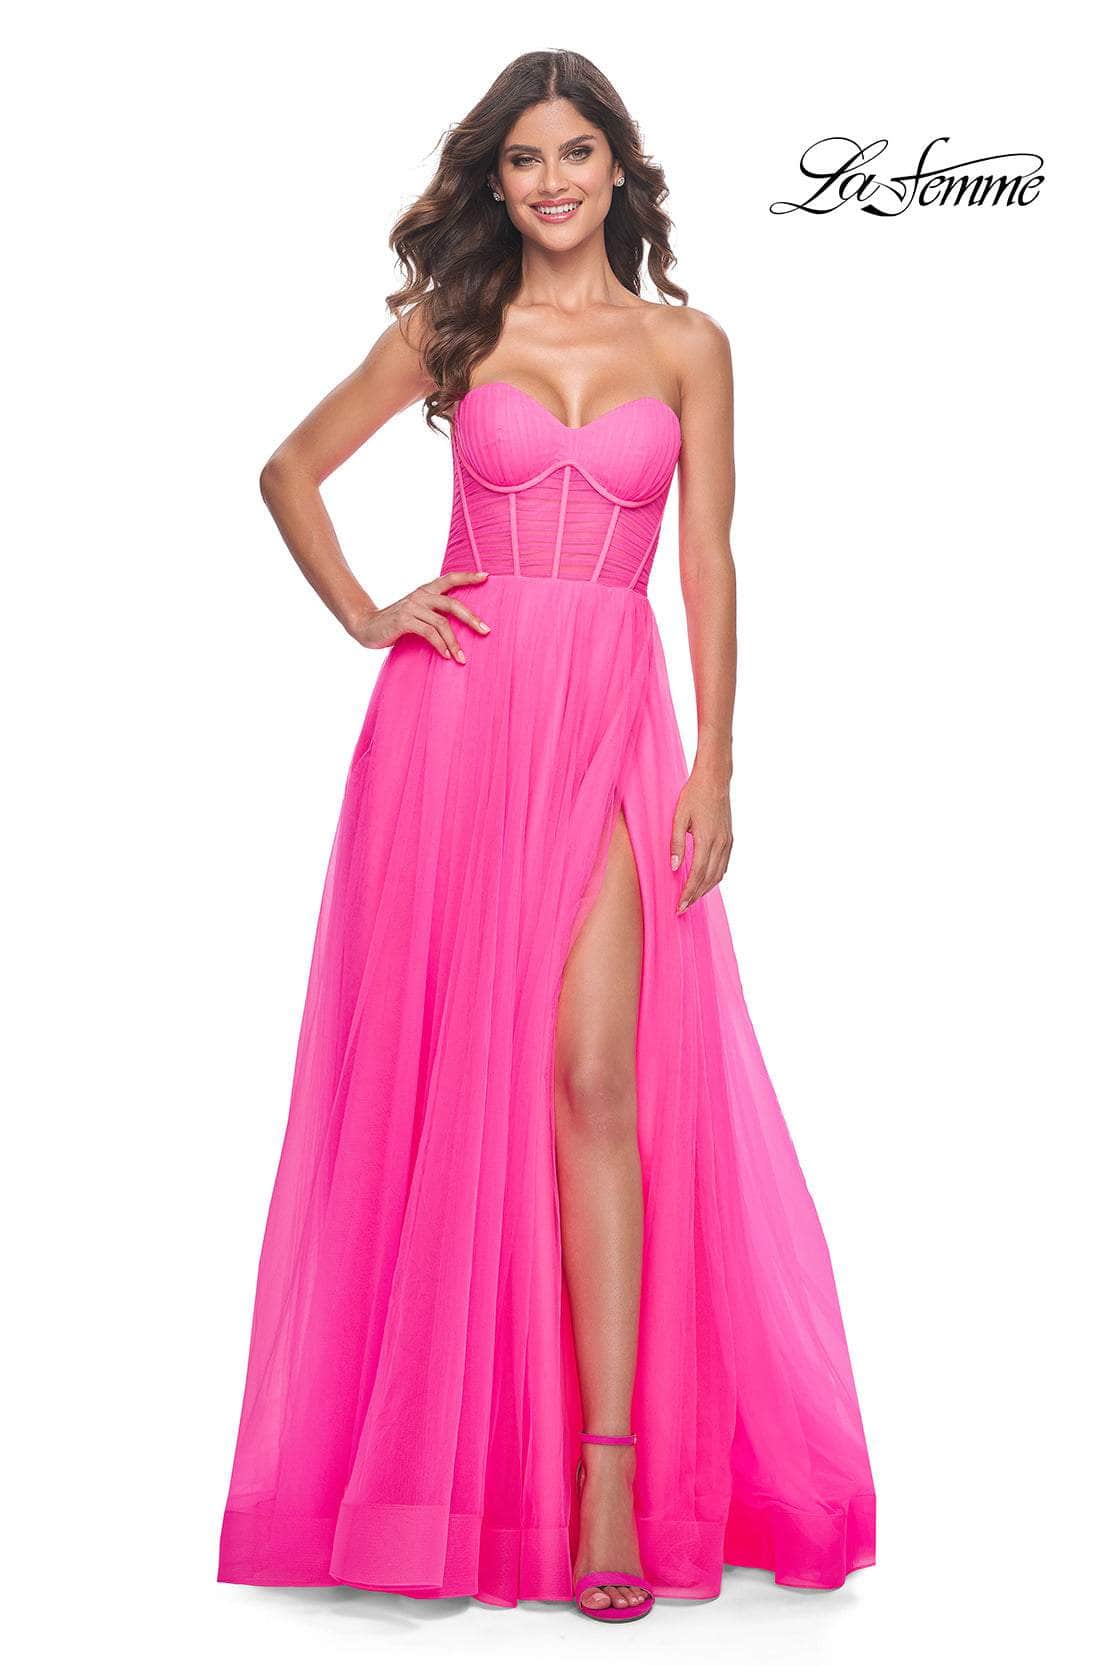 La Femme 32341 - Sweetheart Neck Exposed Boned Prom Gown
